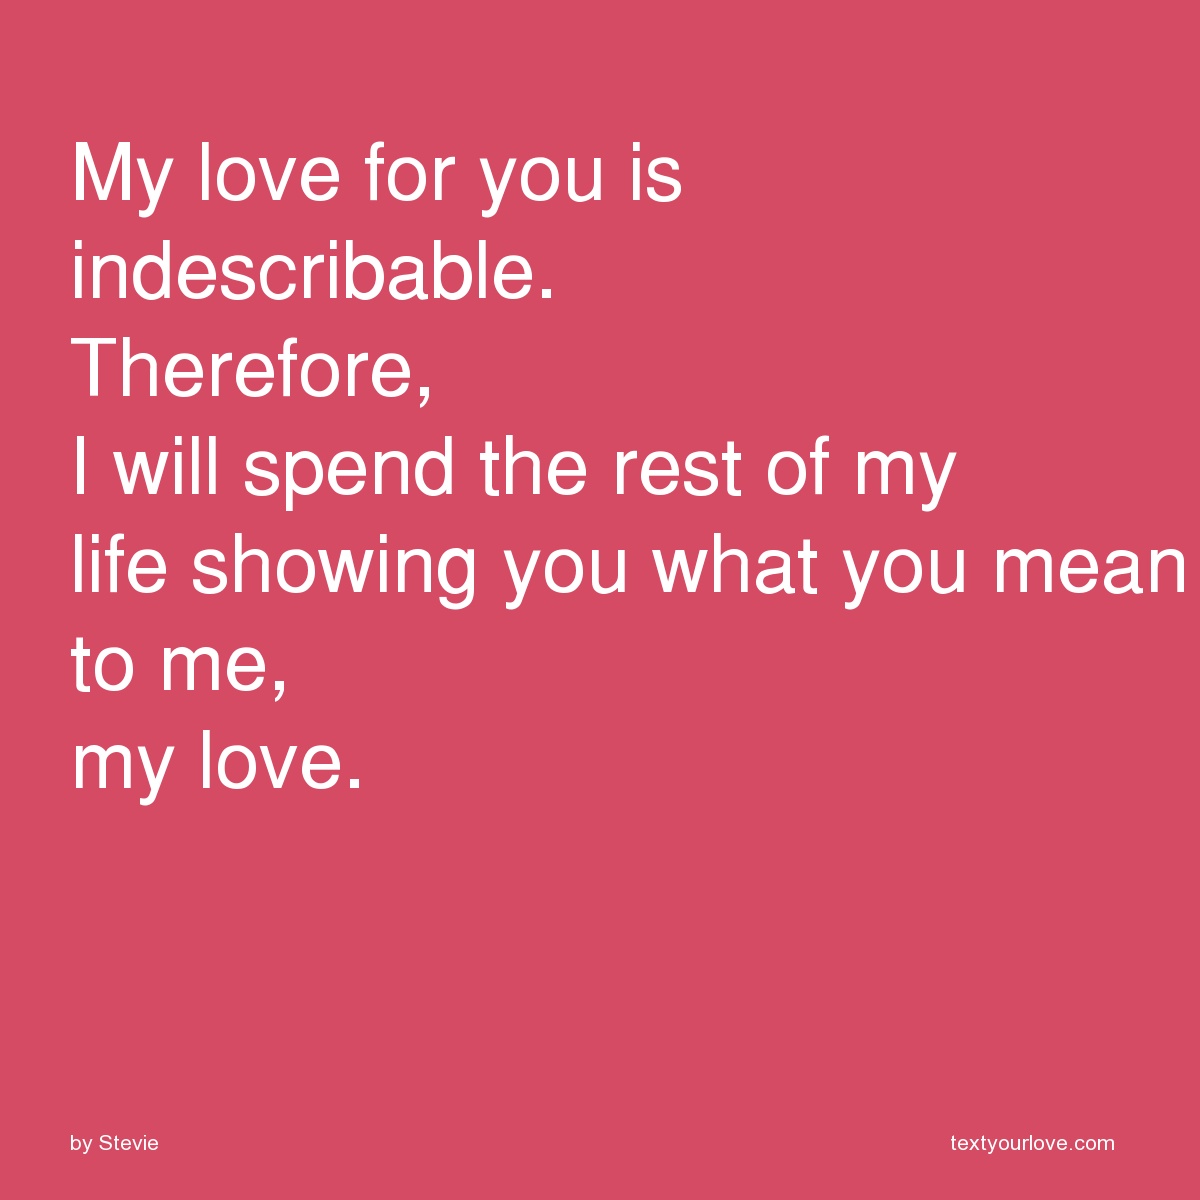 Indescribable Love Quotes. QuotesGram